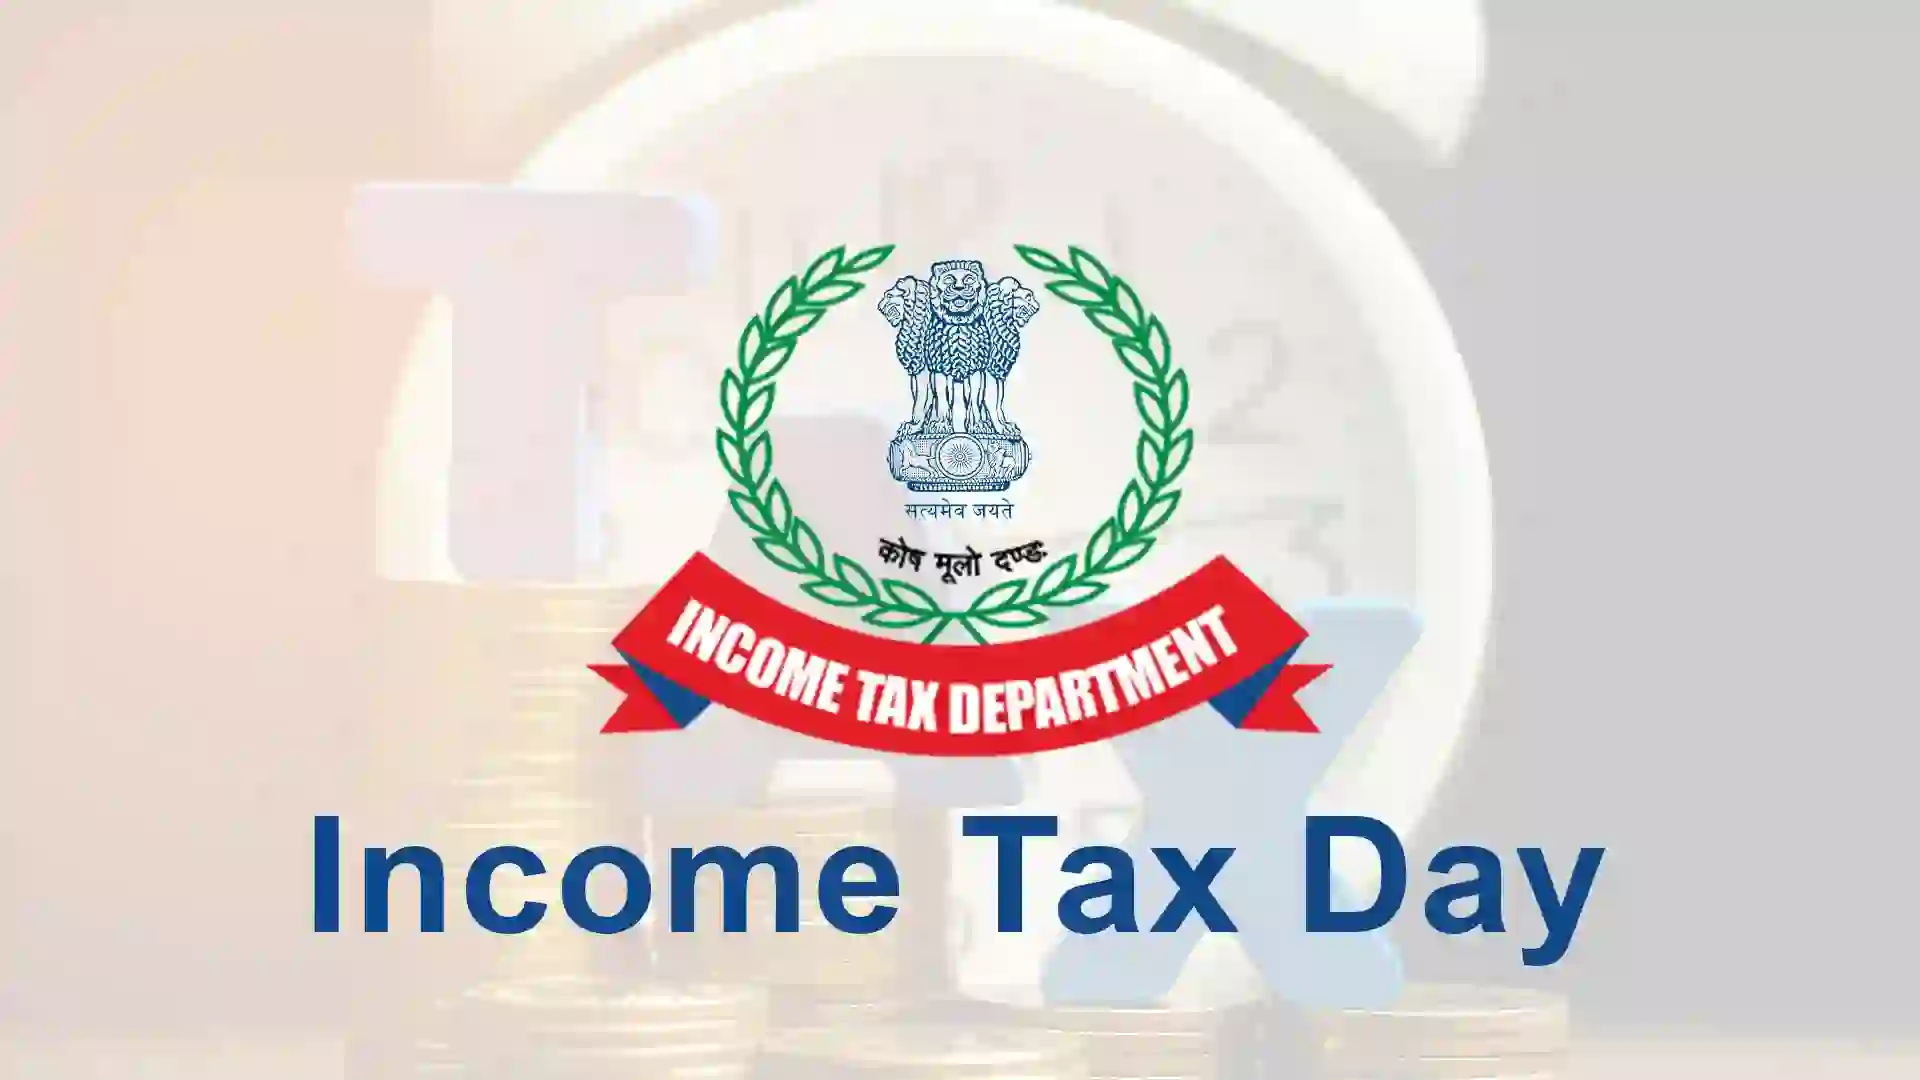 Income Tax Day This Post Design By The Revolution Deshbhakt Hindustani